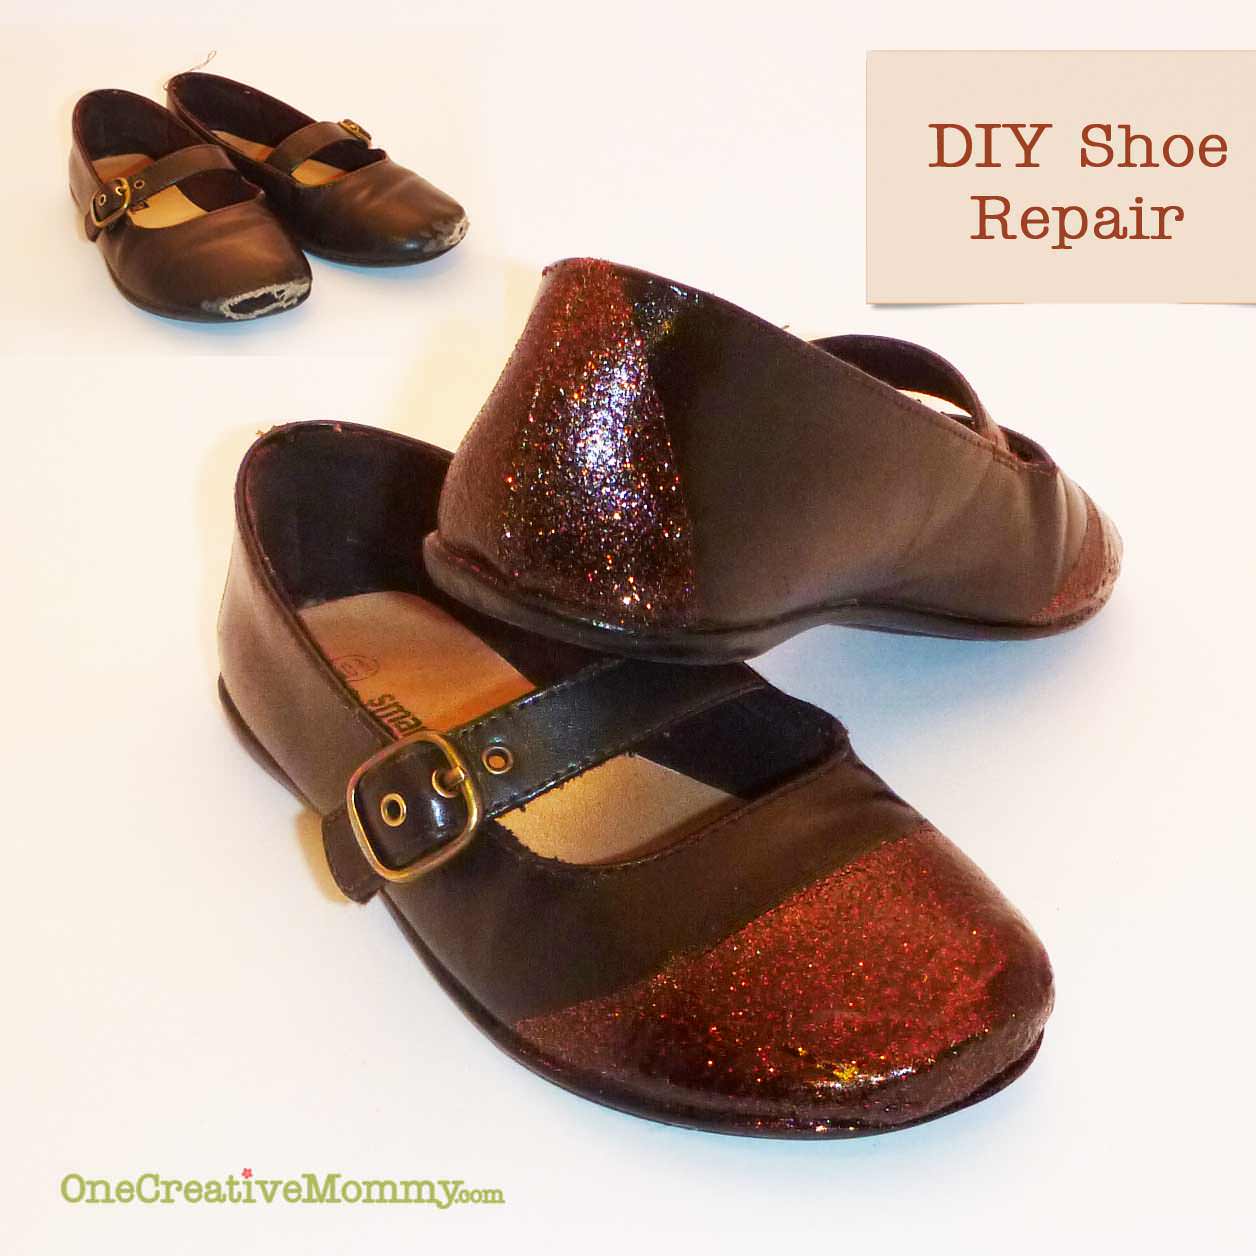 DIY Shoe Repair -- How to Repair Shoes {Don't throw out your little girl's scuffed shoes, give them a new life with glitter and Mod Podge!} OneCreativeMommy.com